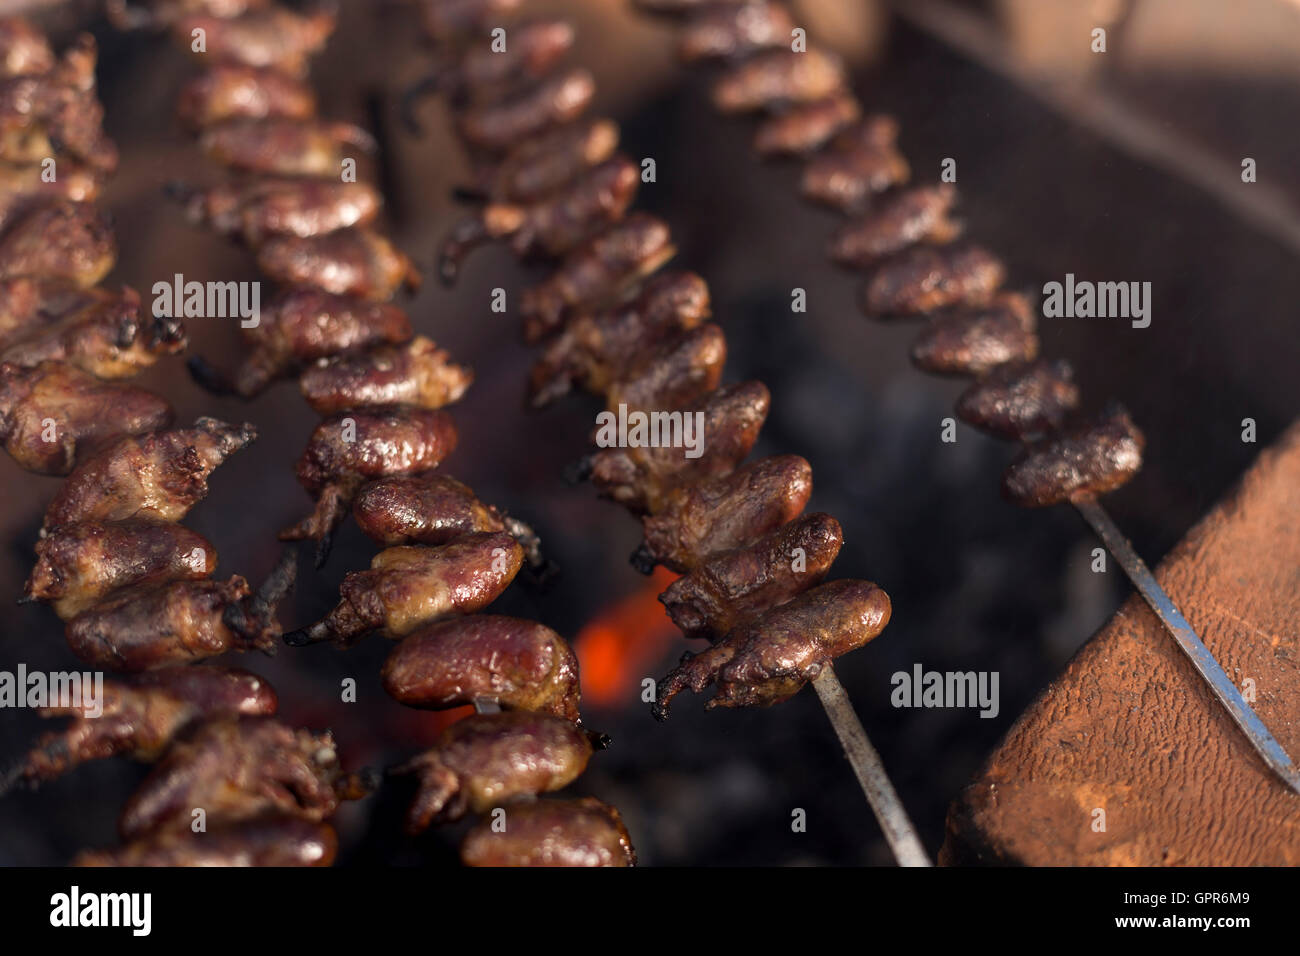 churrasco-traditional-brazilian-barbecue-chicken-hearts-grilled-kebabs-GPR6M9.jpg